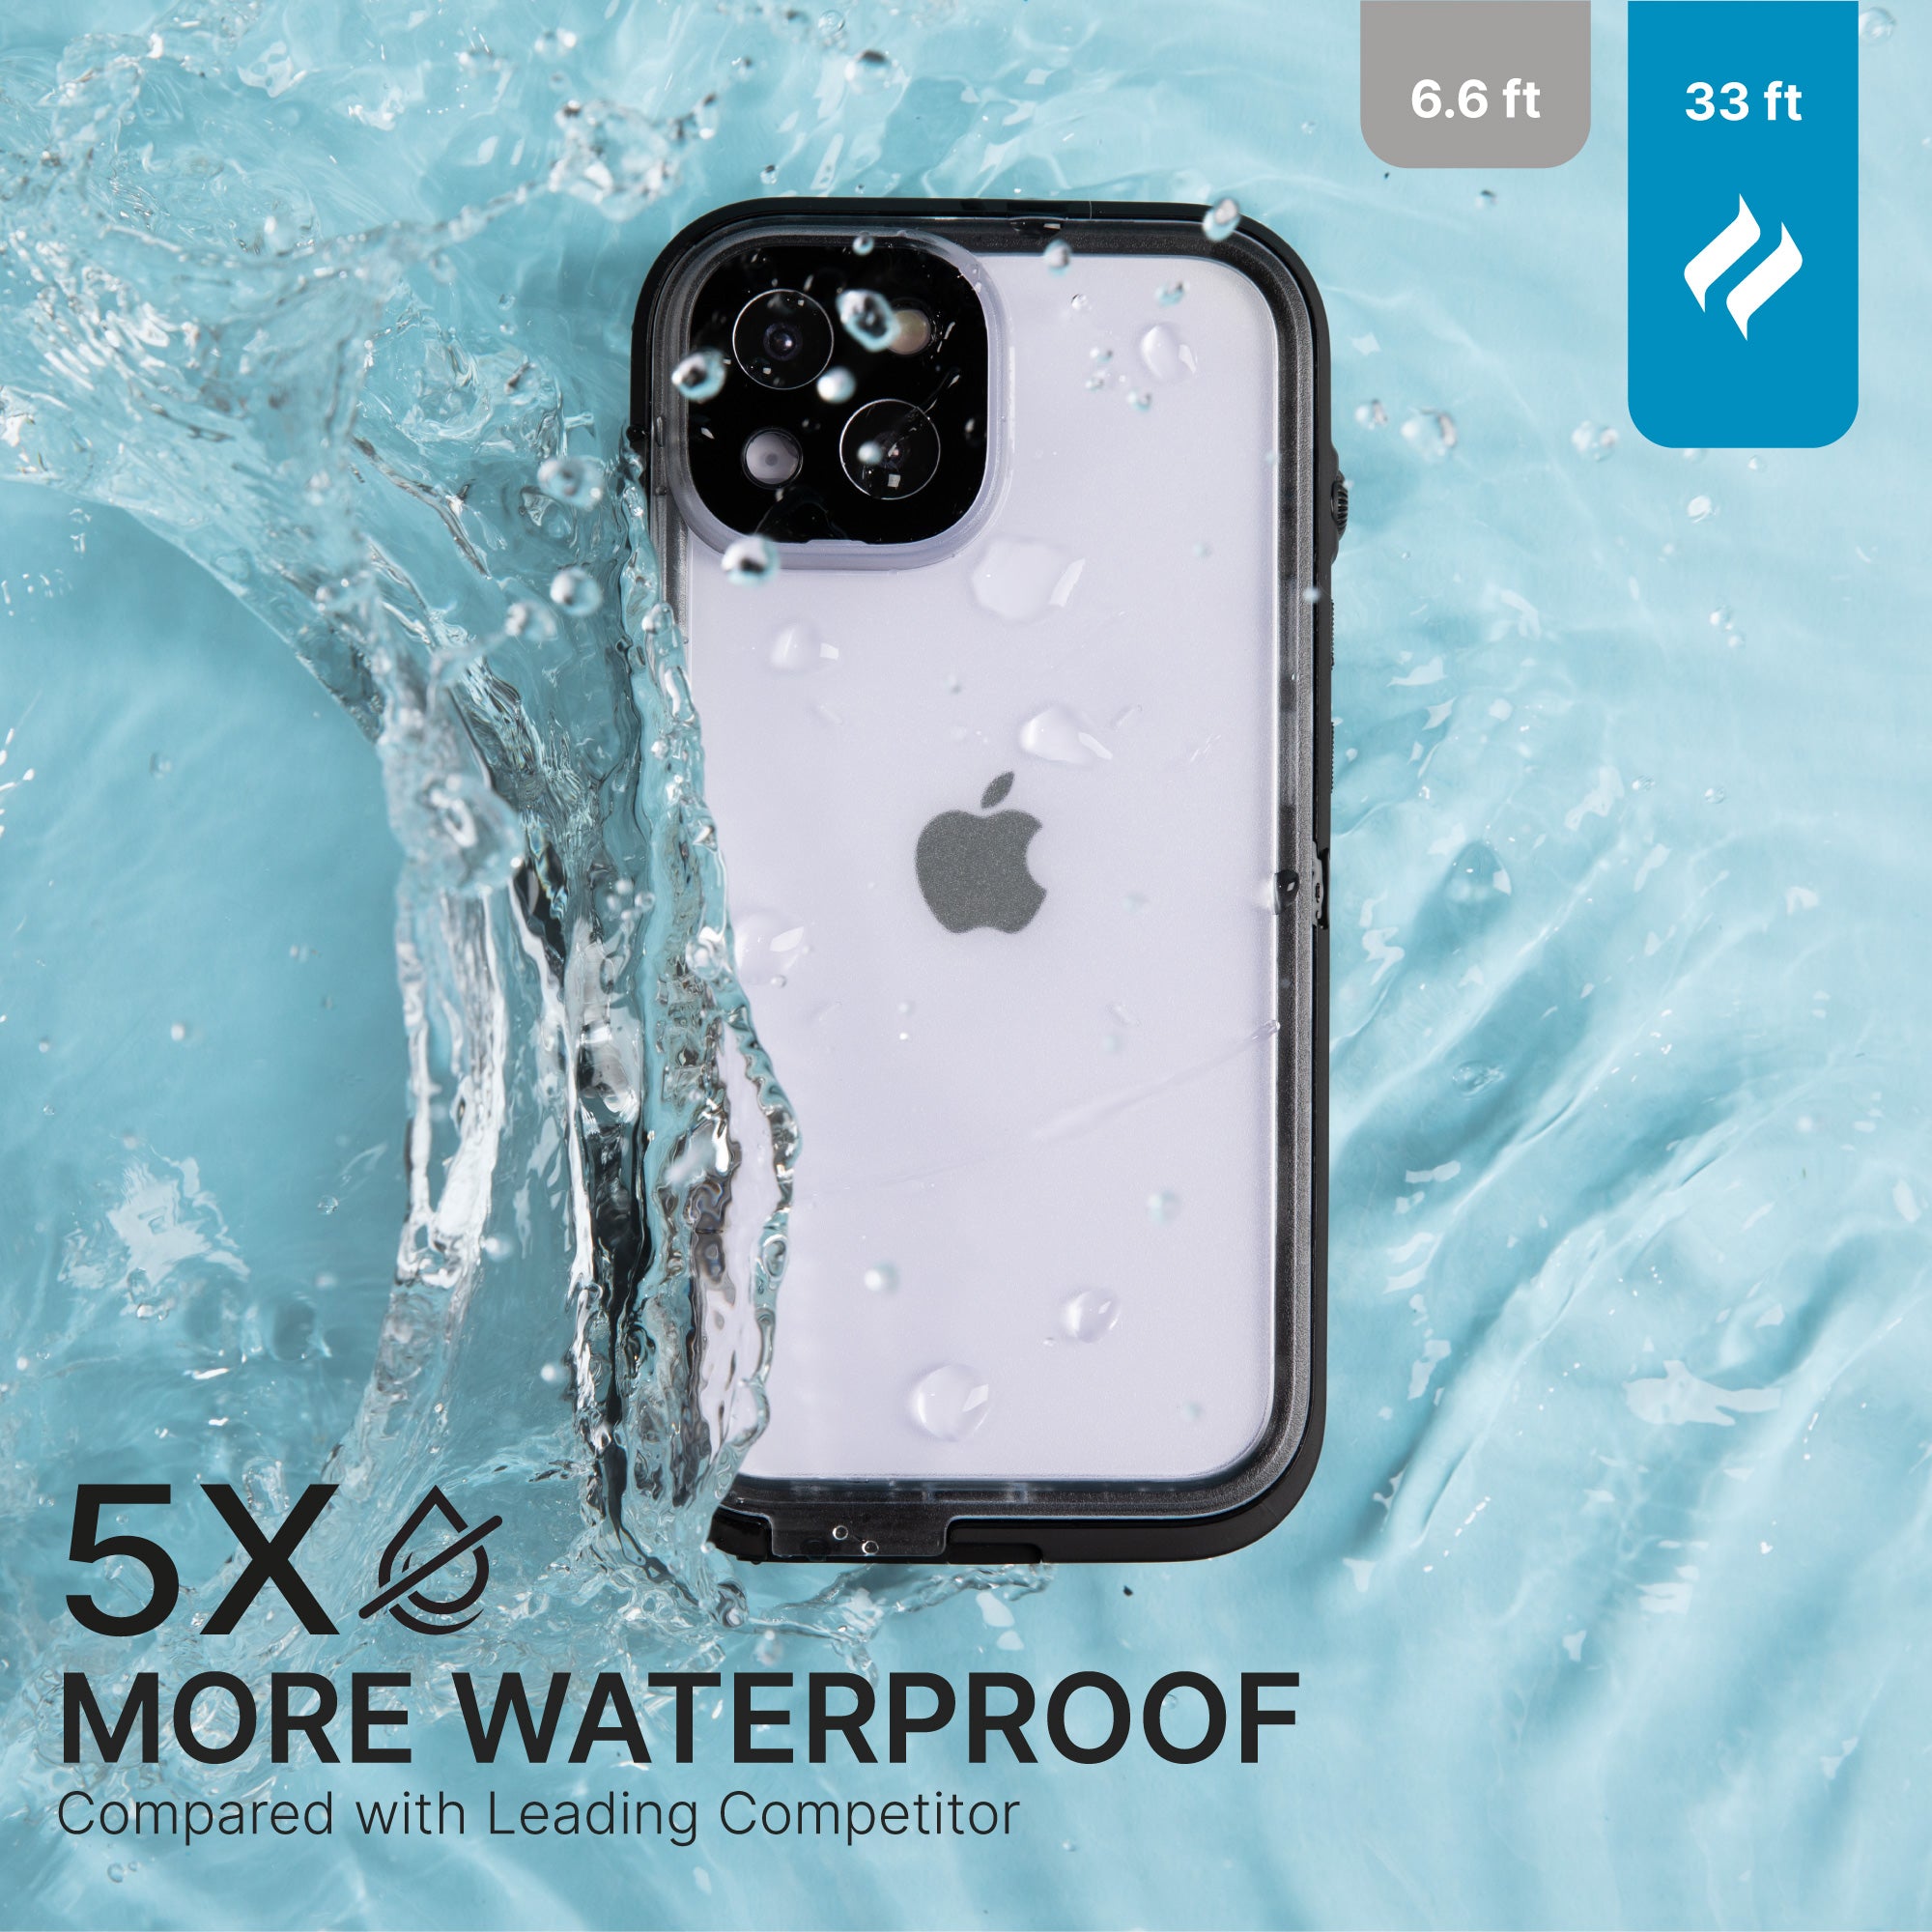 Catalyst Waterproof Case Total Protection iphone 14 series showing the case splashed in water text reads 6.6ft 33ft 5x more waterproof compared with leading competitor